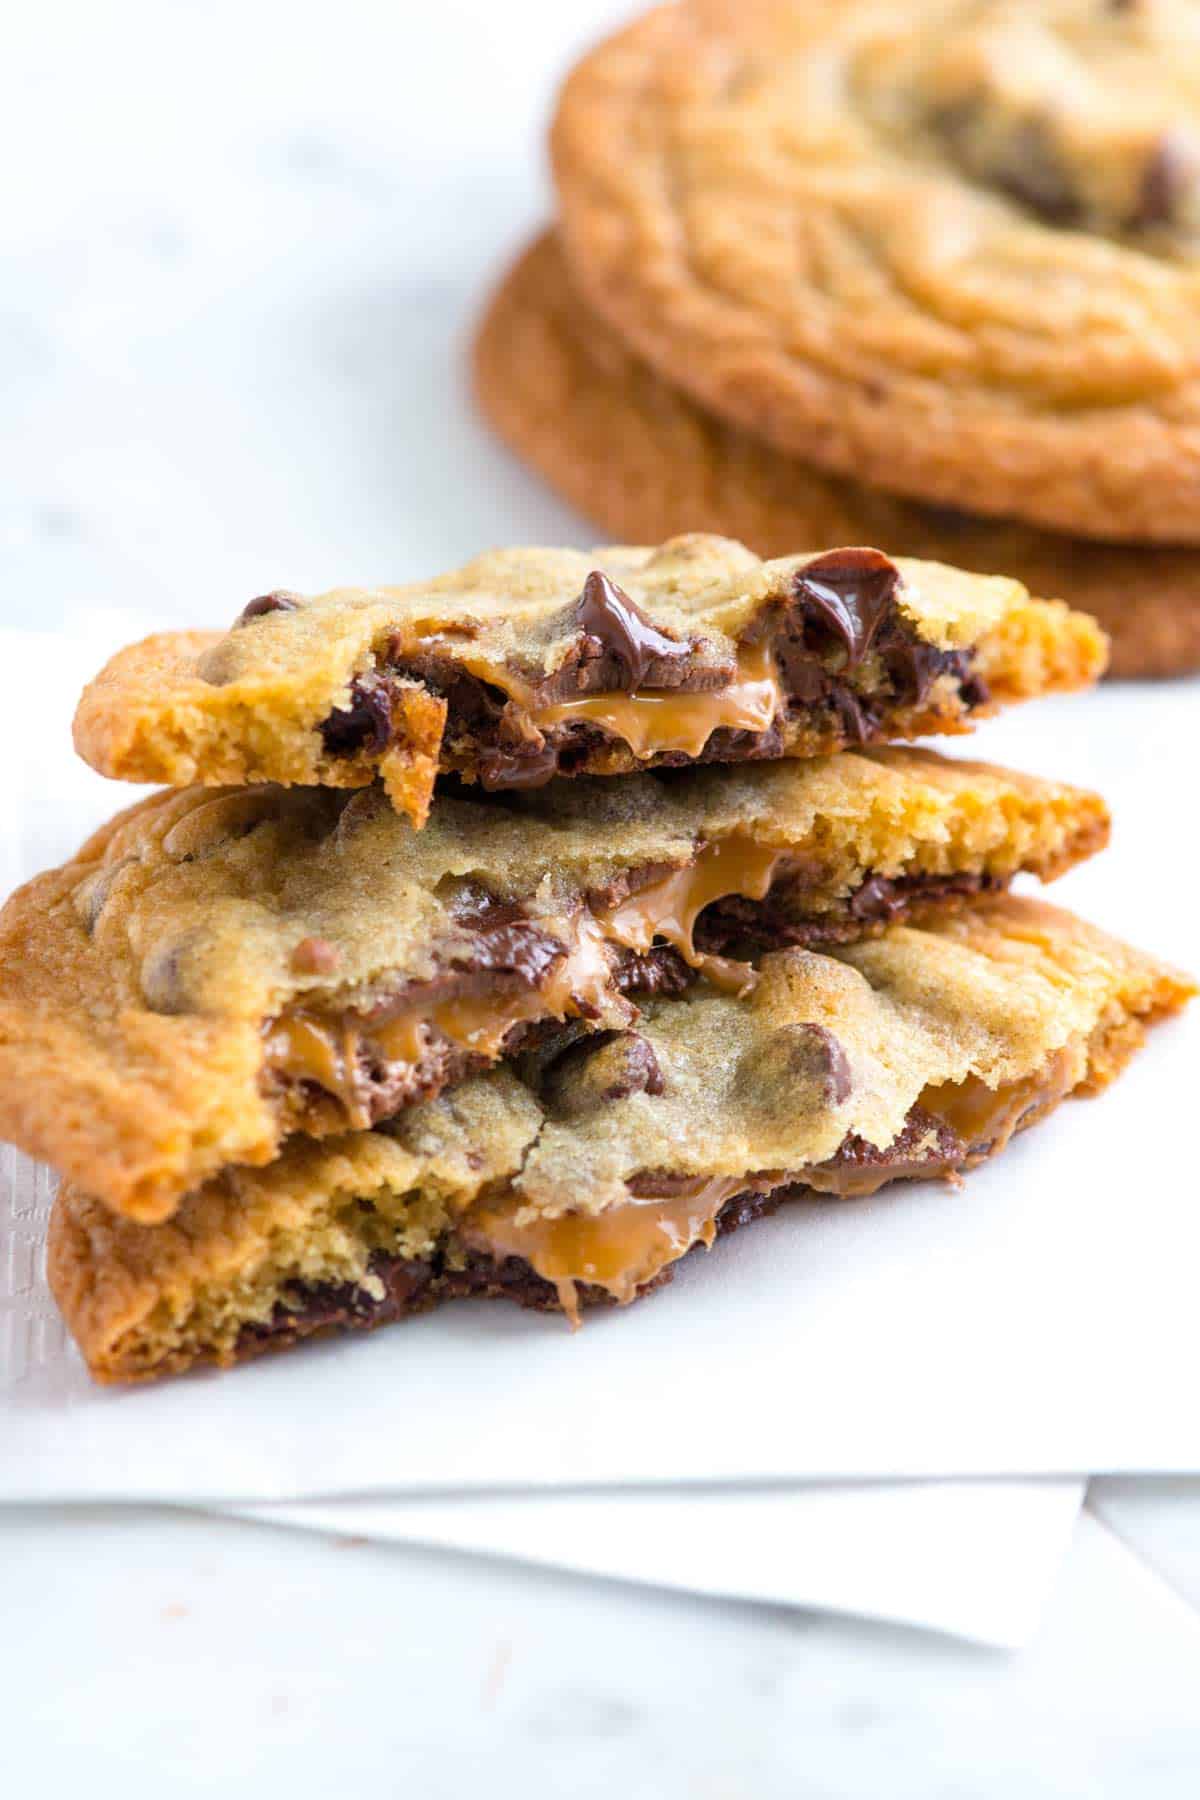 How to Make Candy Bar Stuffed Cookies